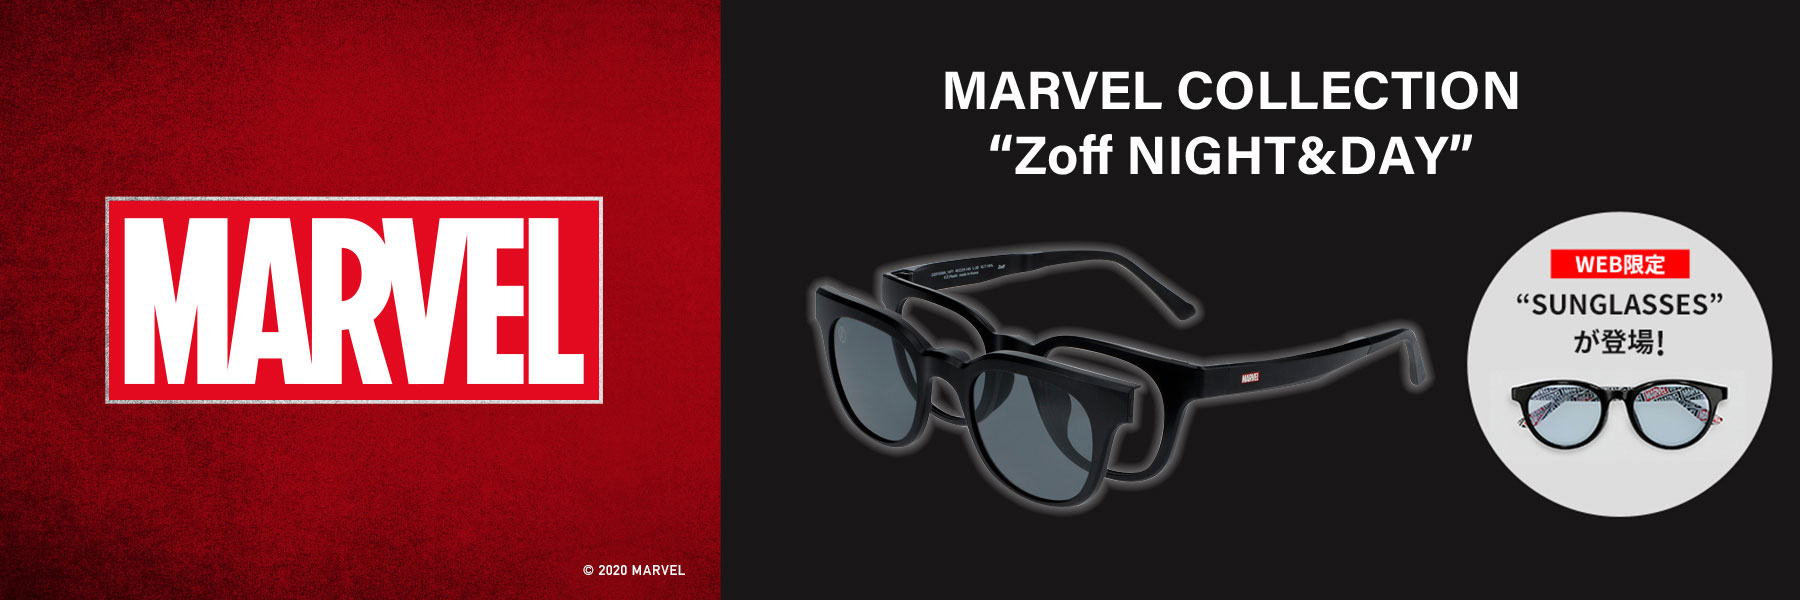 MARVEL COLLECTION Zoff NIGHT&DAY